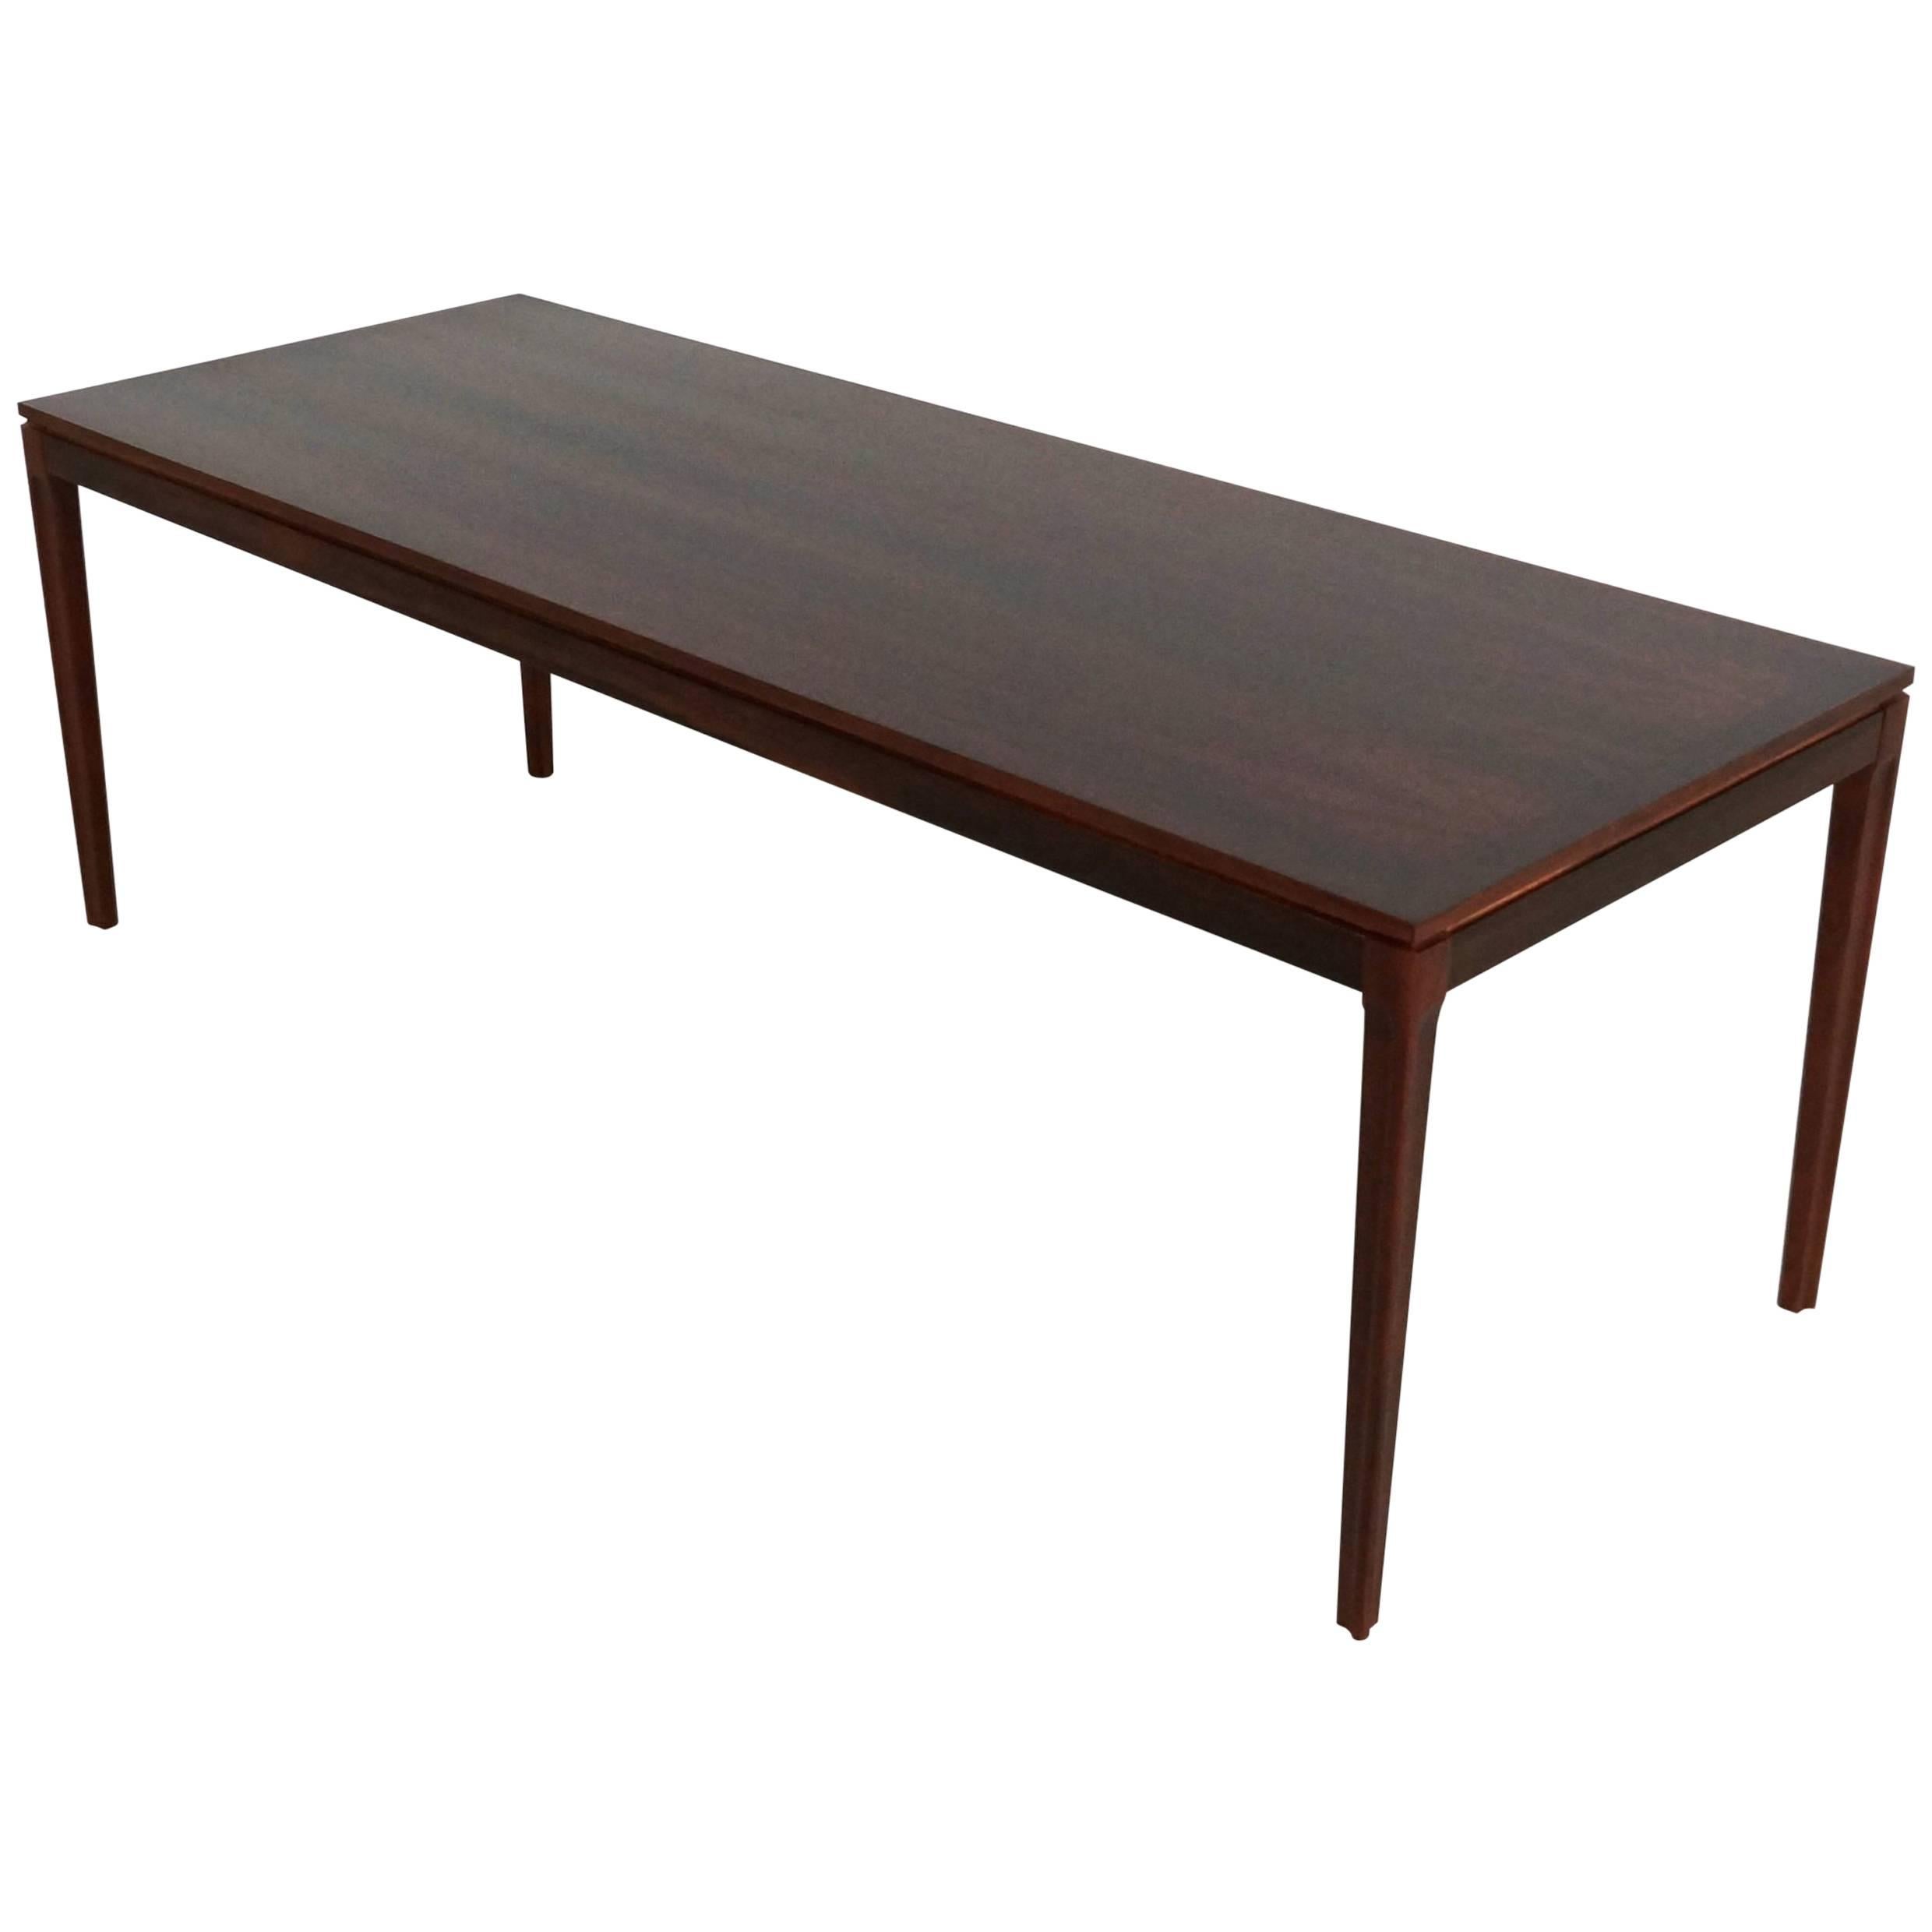 Superb Rectangular Mahogany Coffee Table For Sale